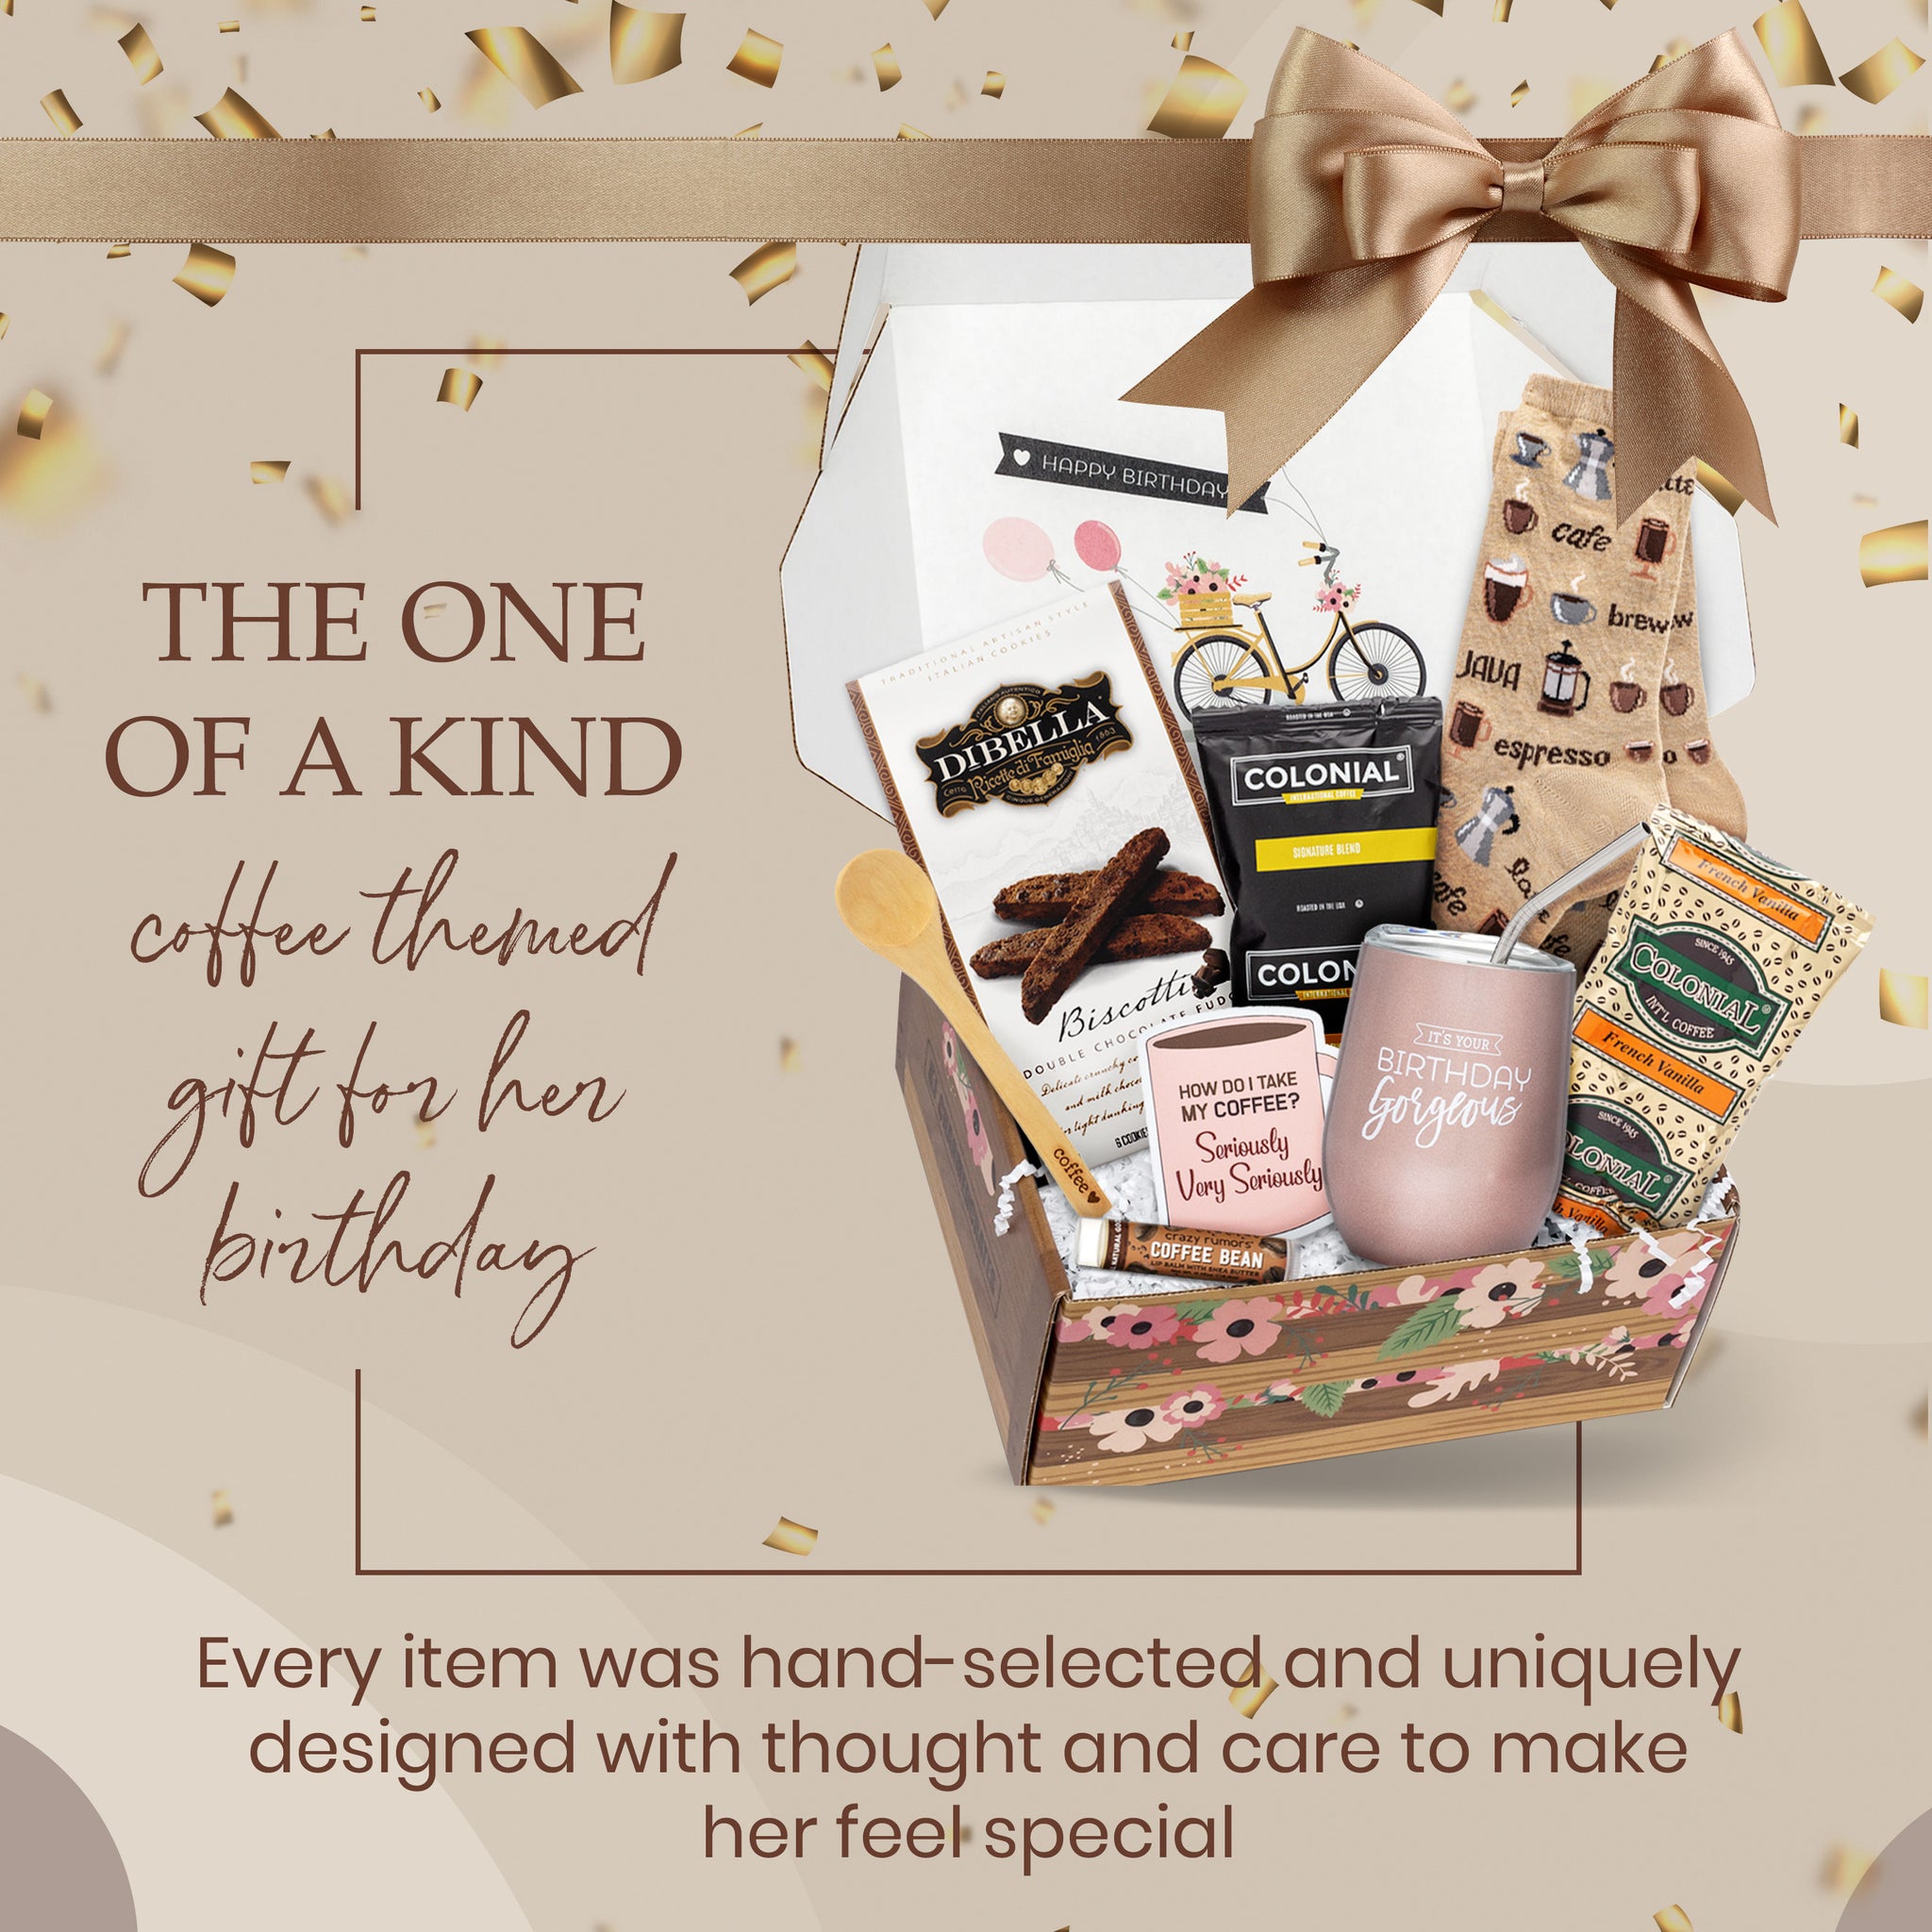 Coffee Lover Gift Box By Silly Obsessions. Unique Gift Basket for birthday,  new home warming, housewarming, dinner party. Best Coffee Gift Set for